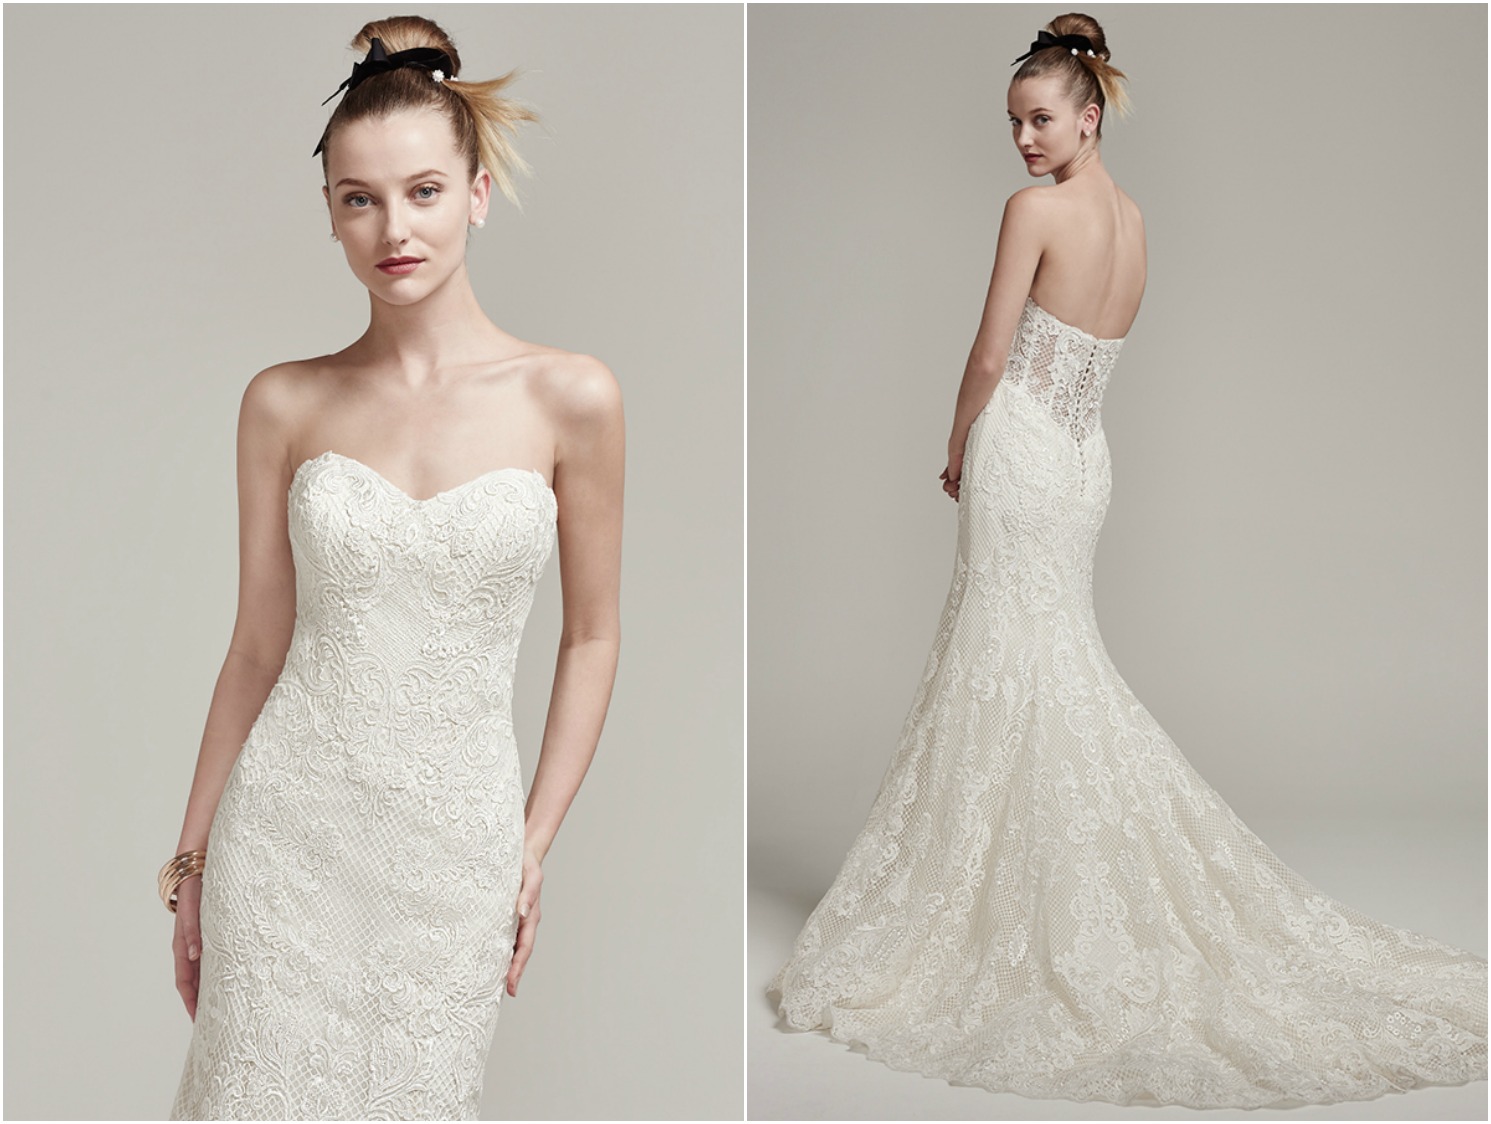 Stunning lattice tulle meets modern lace embroidery, creating a stunning fit and flare wedding dress, complete with sweetheart neckline and intricate lace hemline and train. Finished with illusion back and pearl buttons over zipper closure. 

<a href="https://www.maggiesottero.com/sottero-and-midgley/leona/9867" target="_blank">Sottero &amp; Midgley</a>